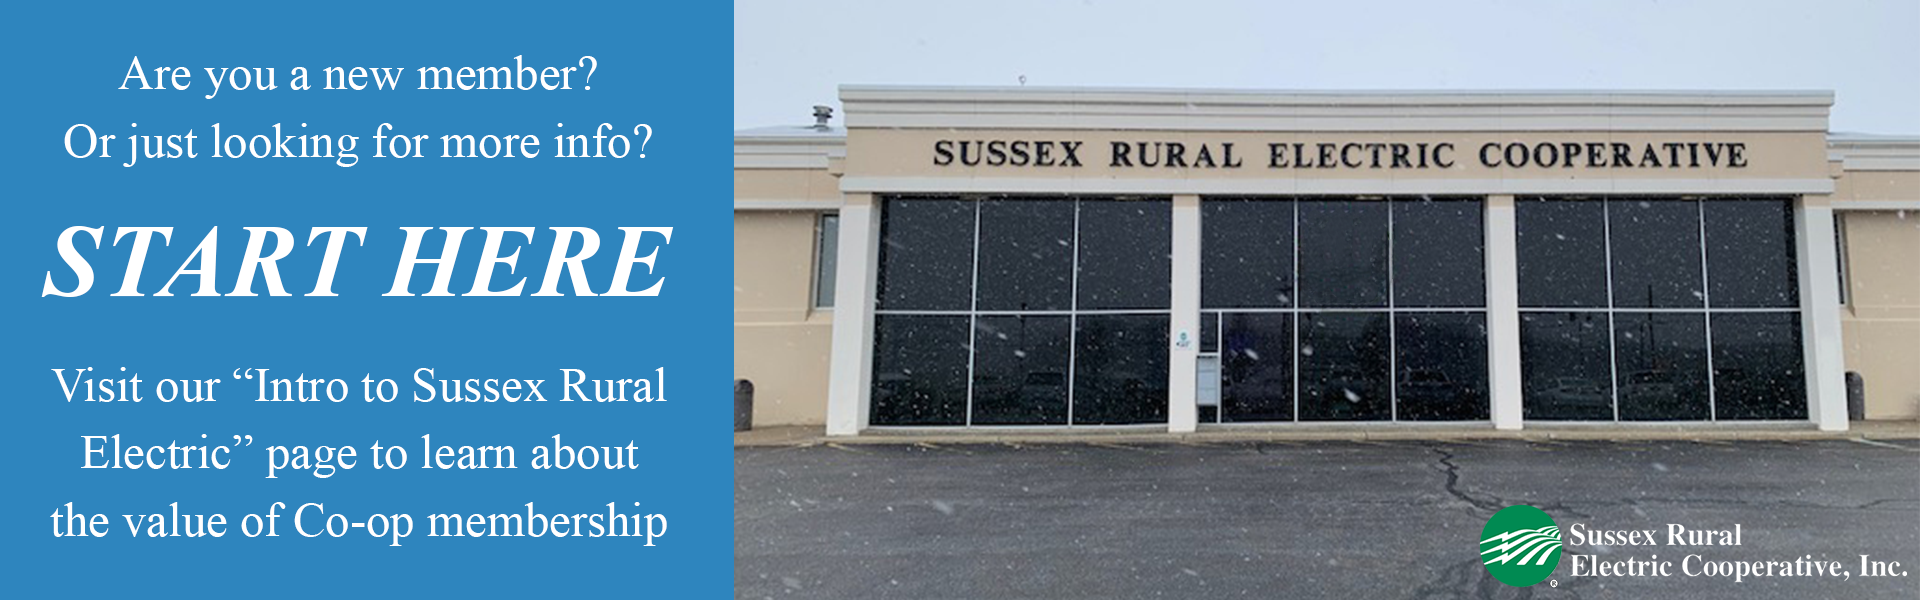 Are you a new member? Or just looking for more info? START HERE! Visit our "Intro to Sussex Rural Electric" page to learn about the value of membership.